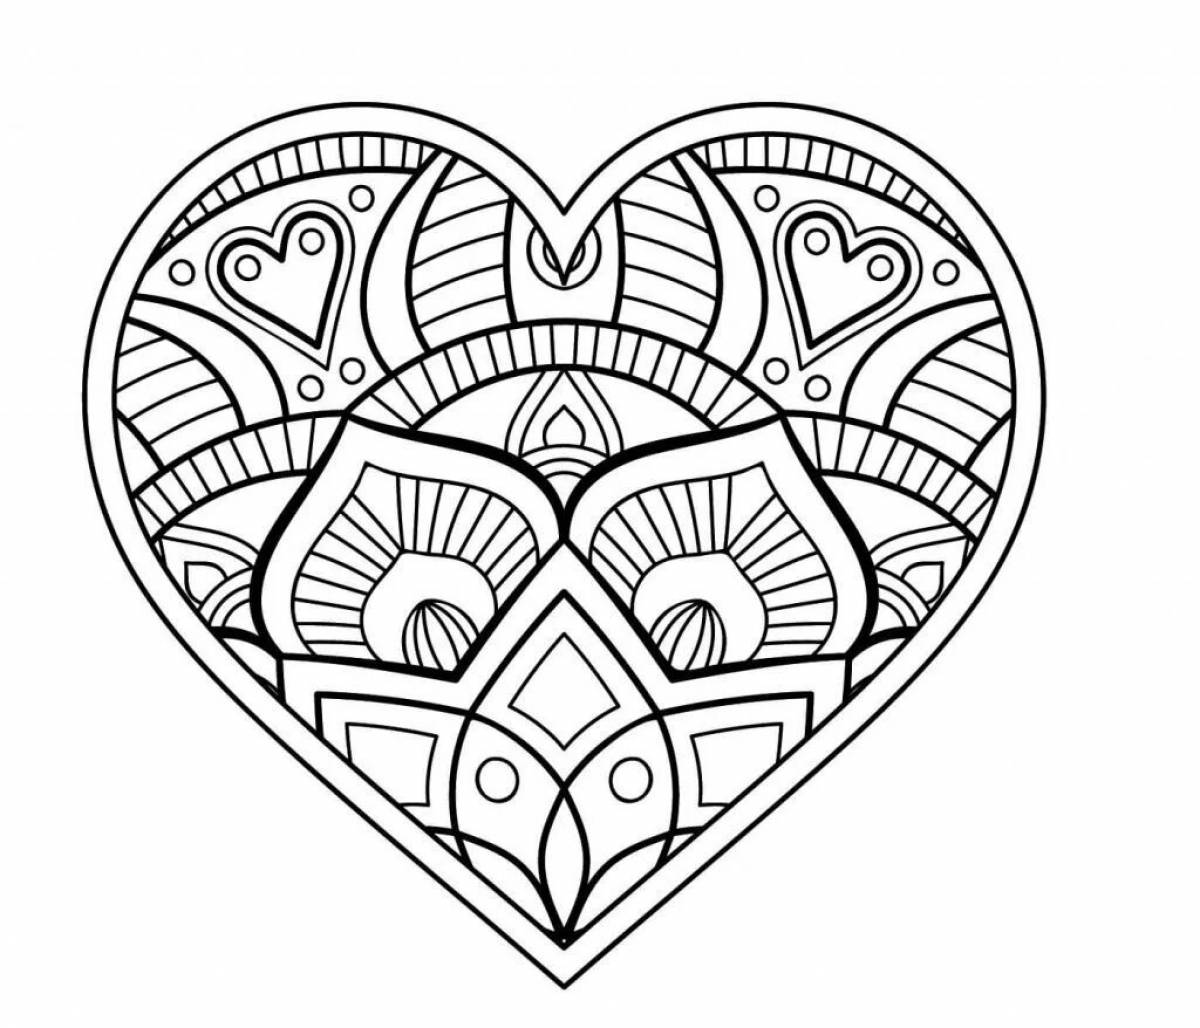 Coloring page bewitching heart